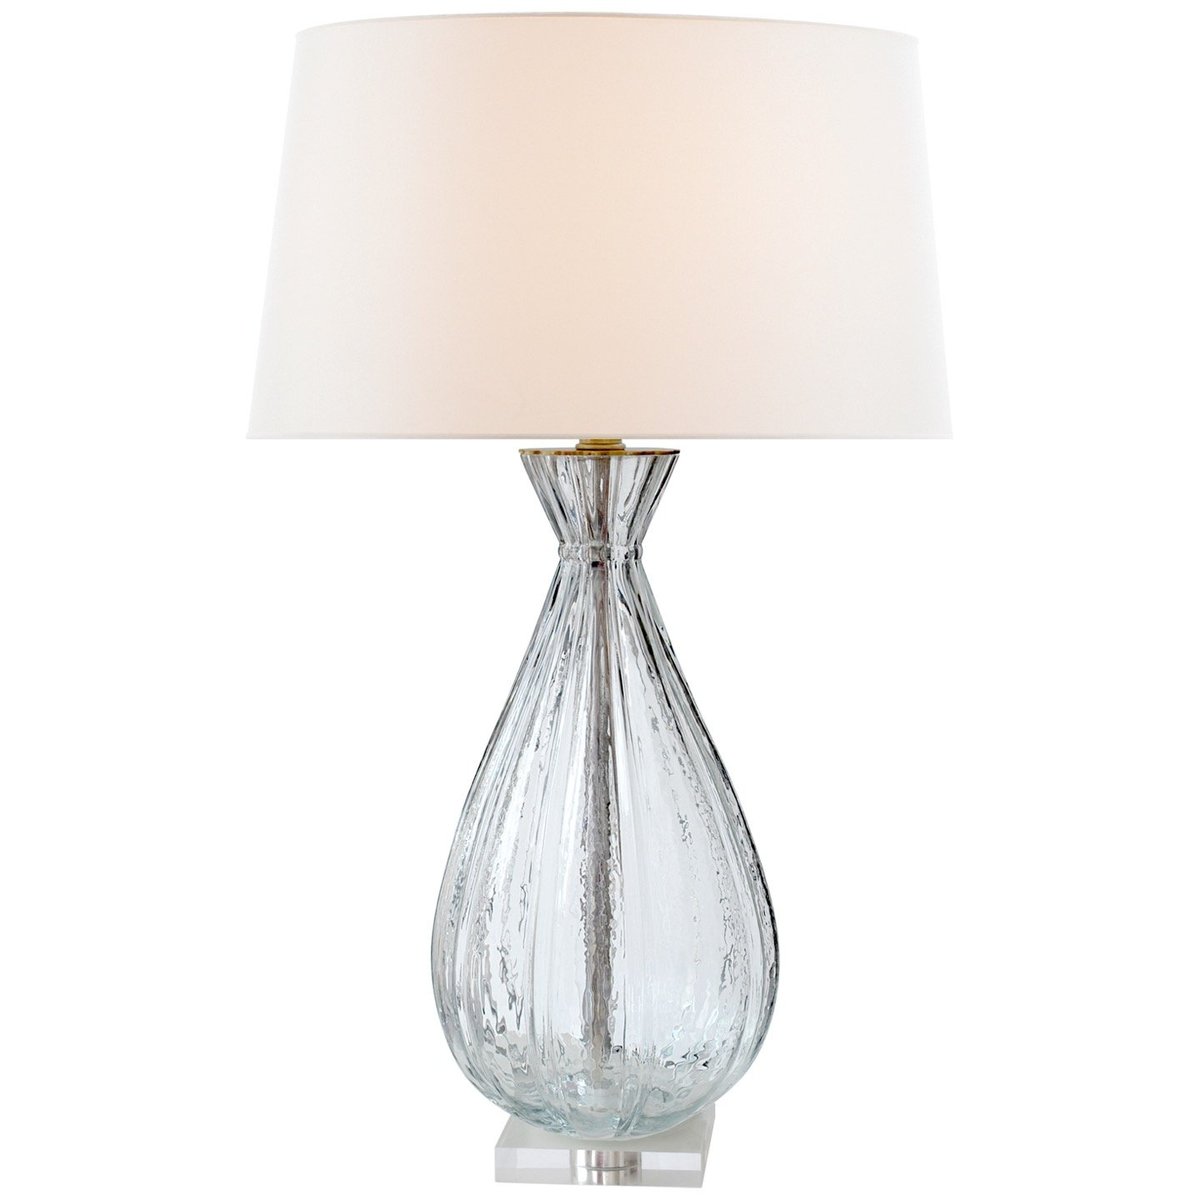 Treviso Table Lamp